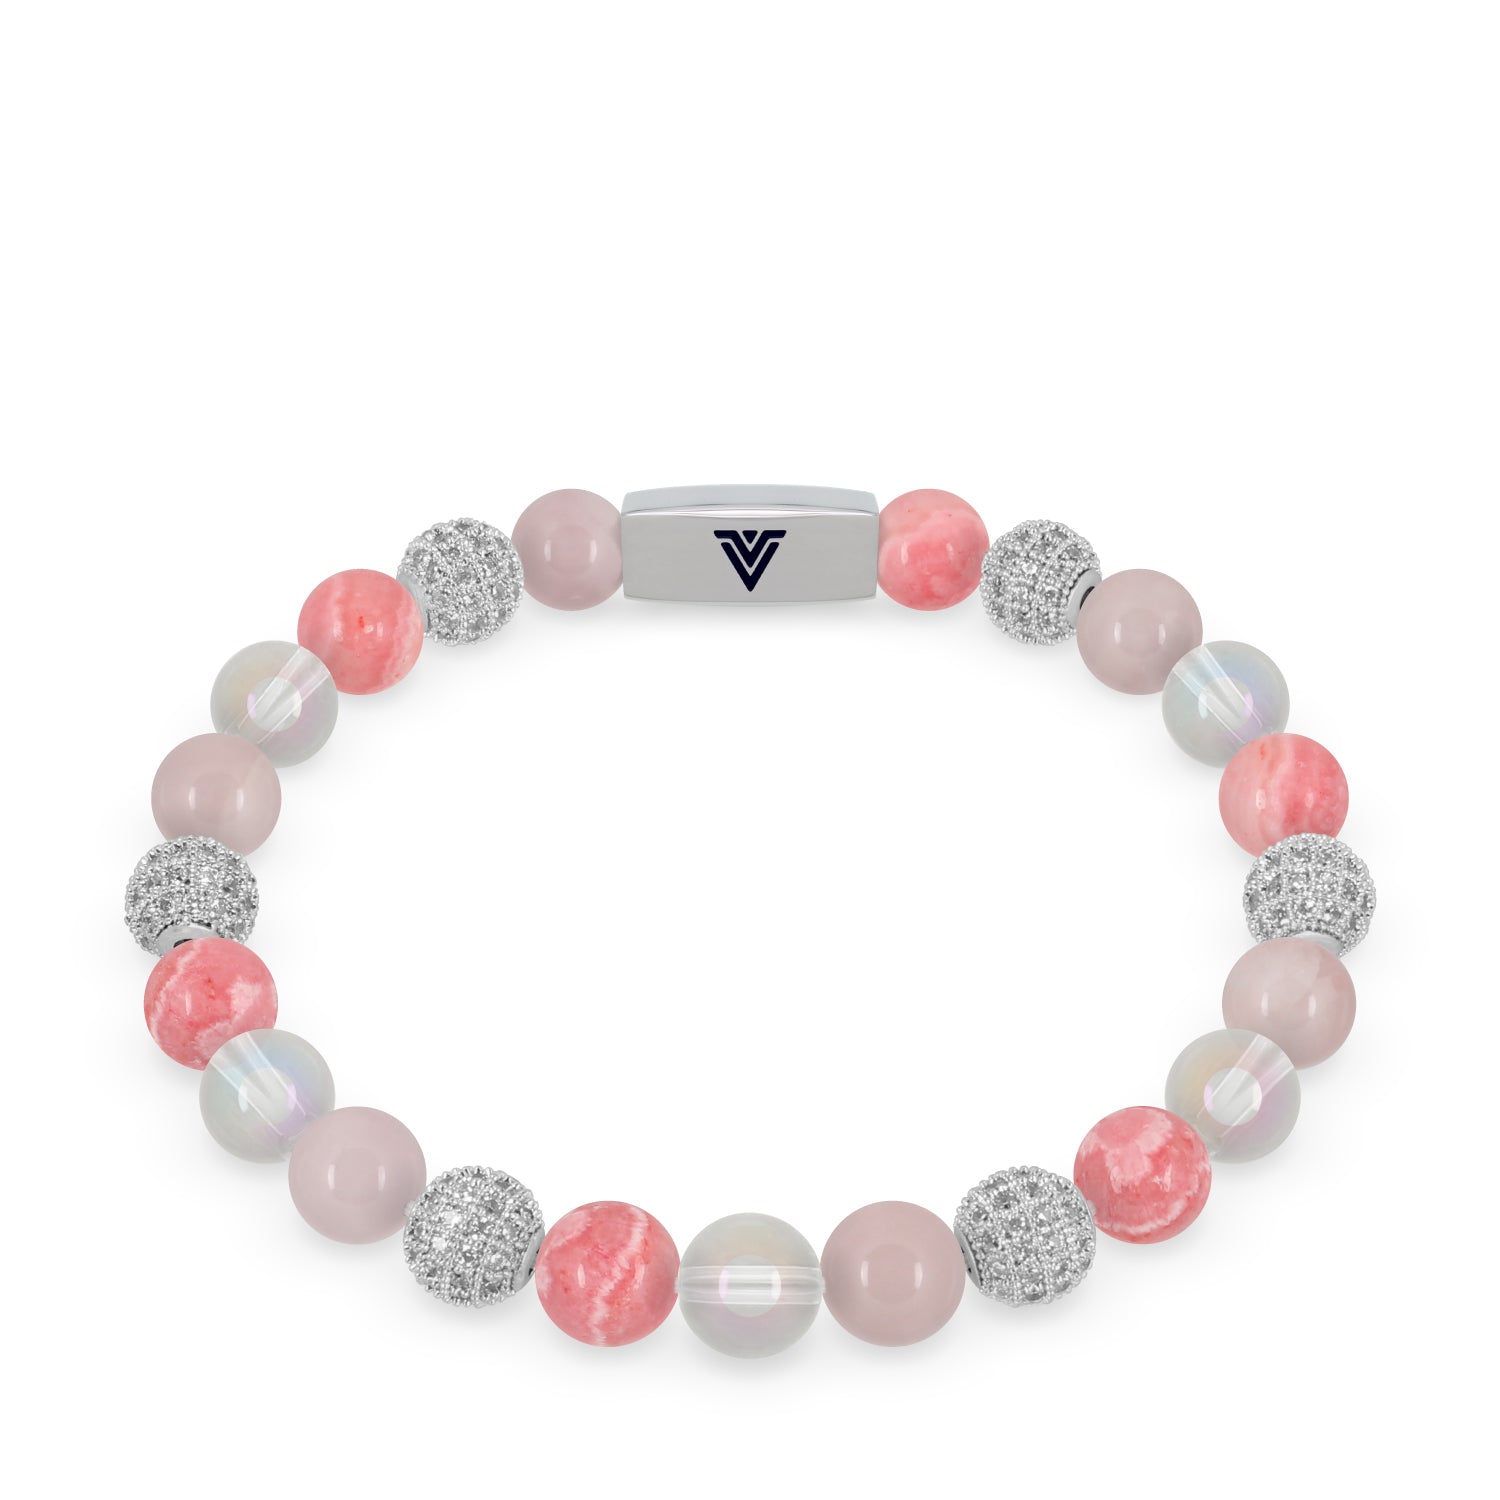 Front view of an 8mm Pink Sirius beaded stretch bracelet featuring Rose Quartz, Silver Pave, Rhodochrosite, & Angel Aura Quartz crystal and silver stainless steel logo bead made by Voltlin